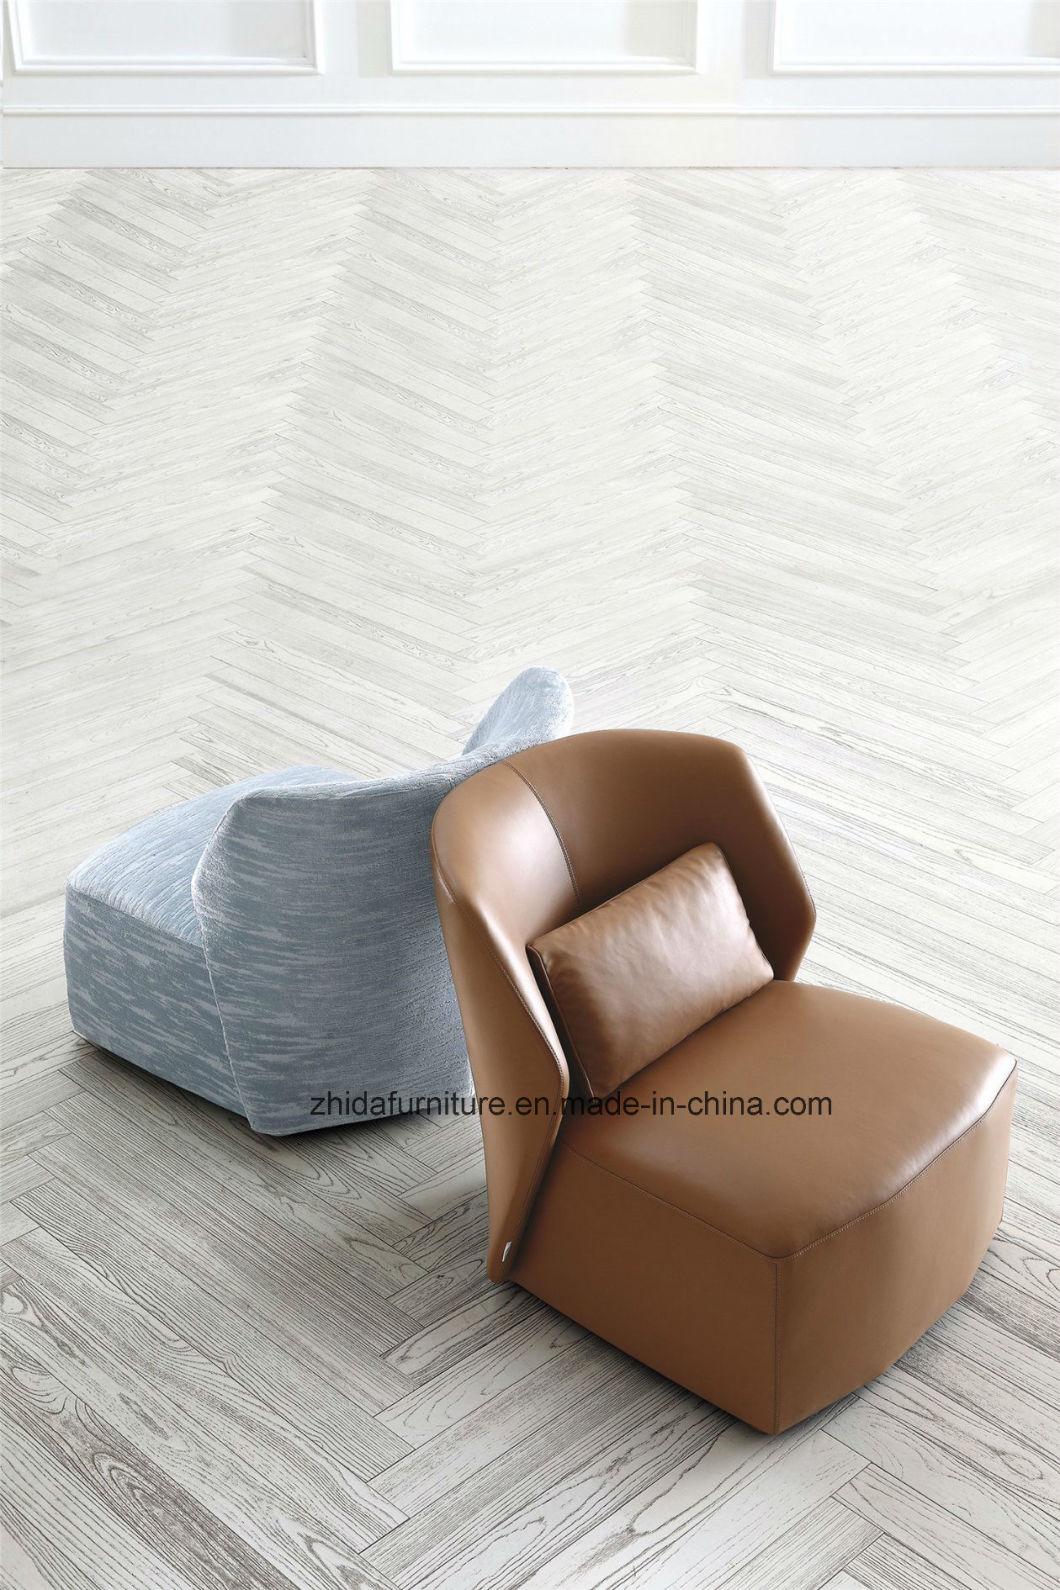 Contemporary Fabric Chair /Leather Chair /Home Chair